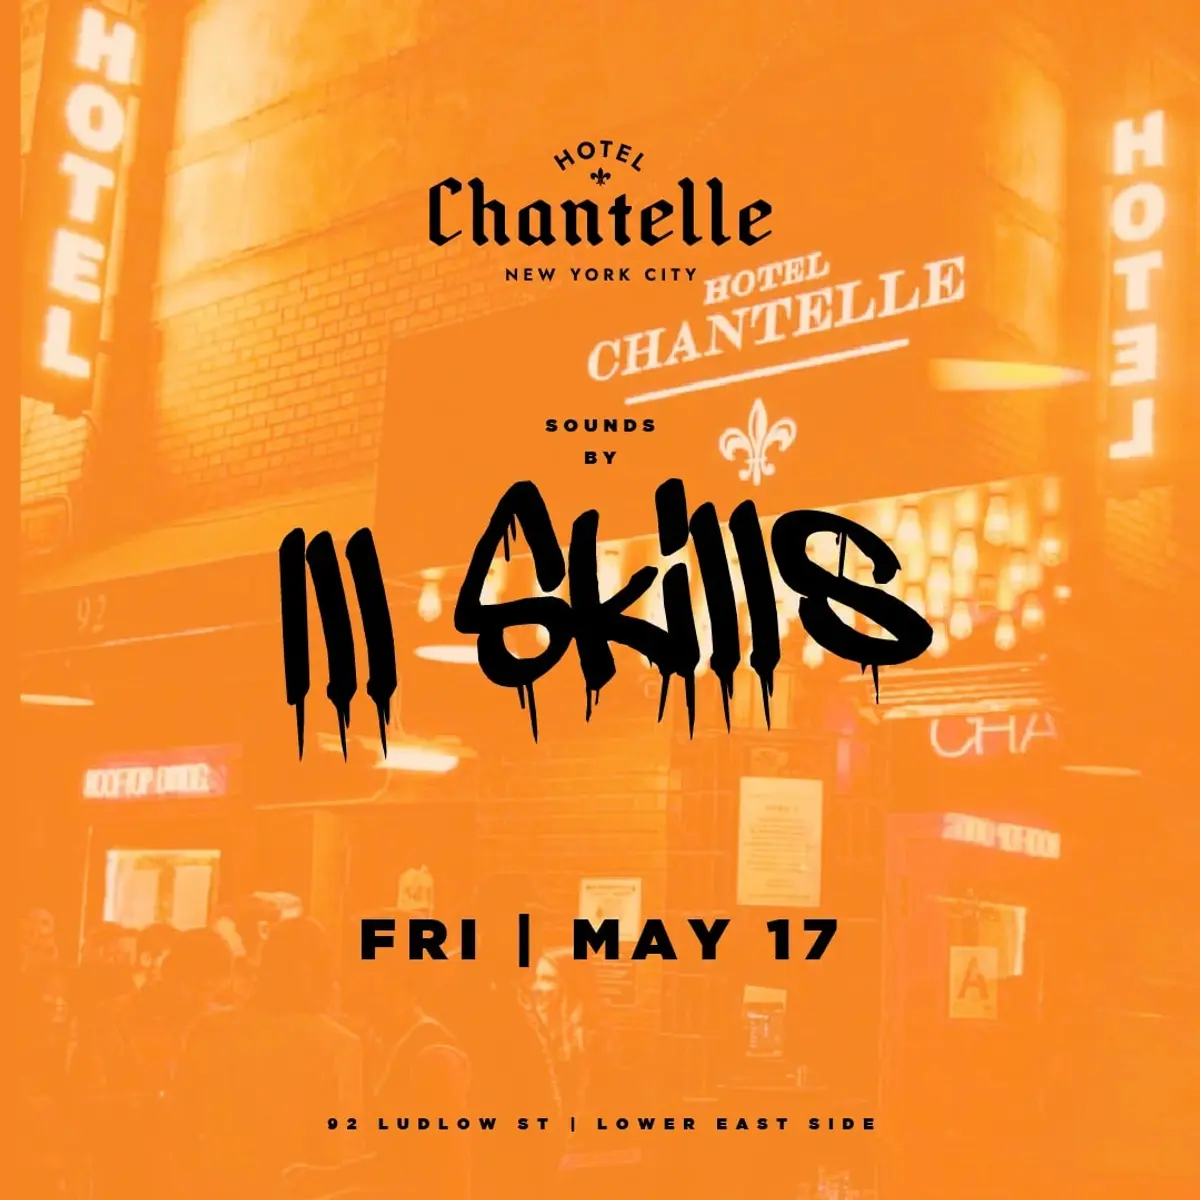 Hotel Chantelle Friday 5/17 - Rooftop Access